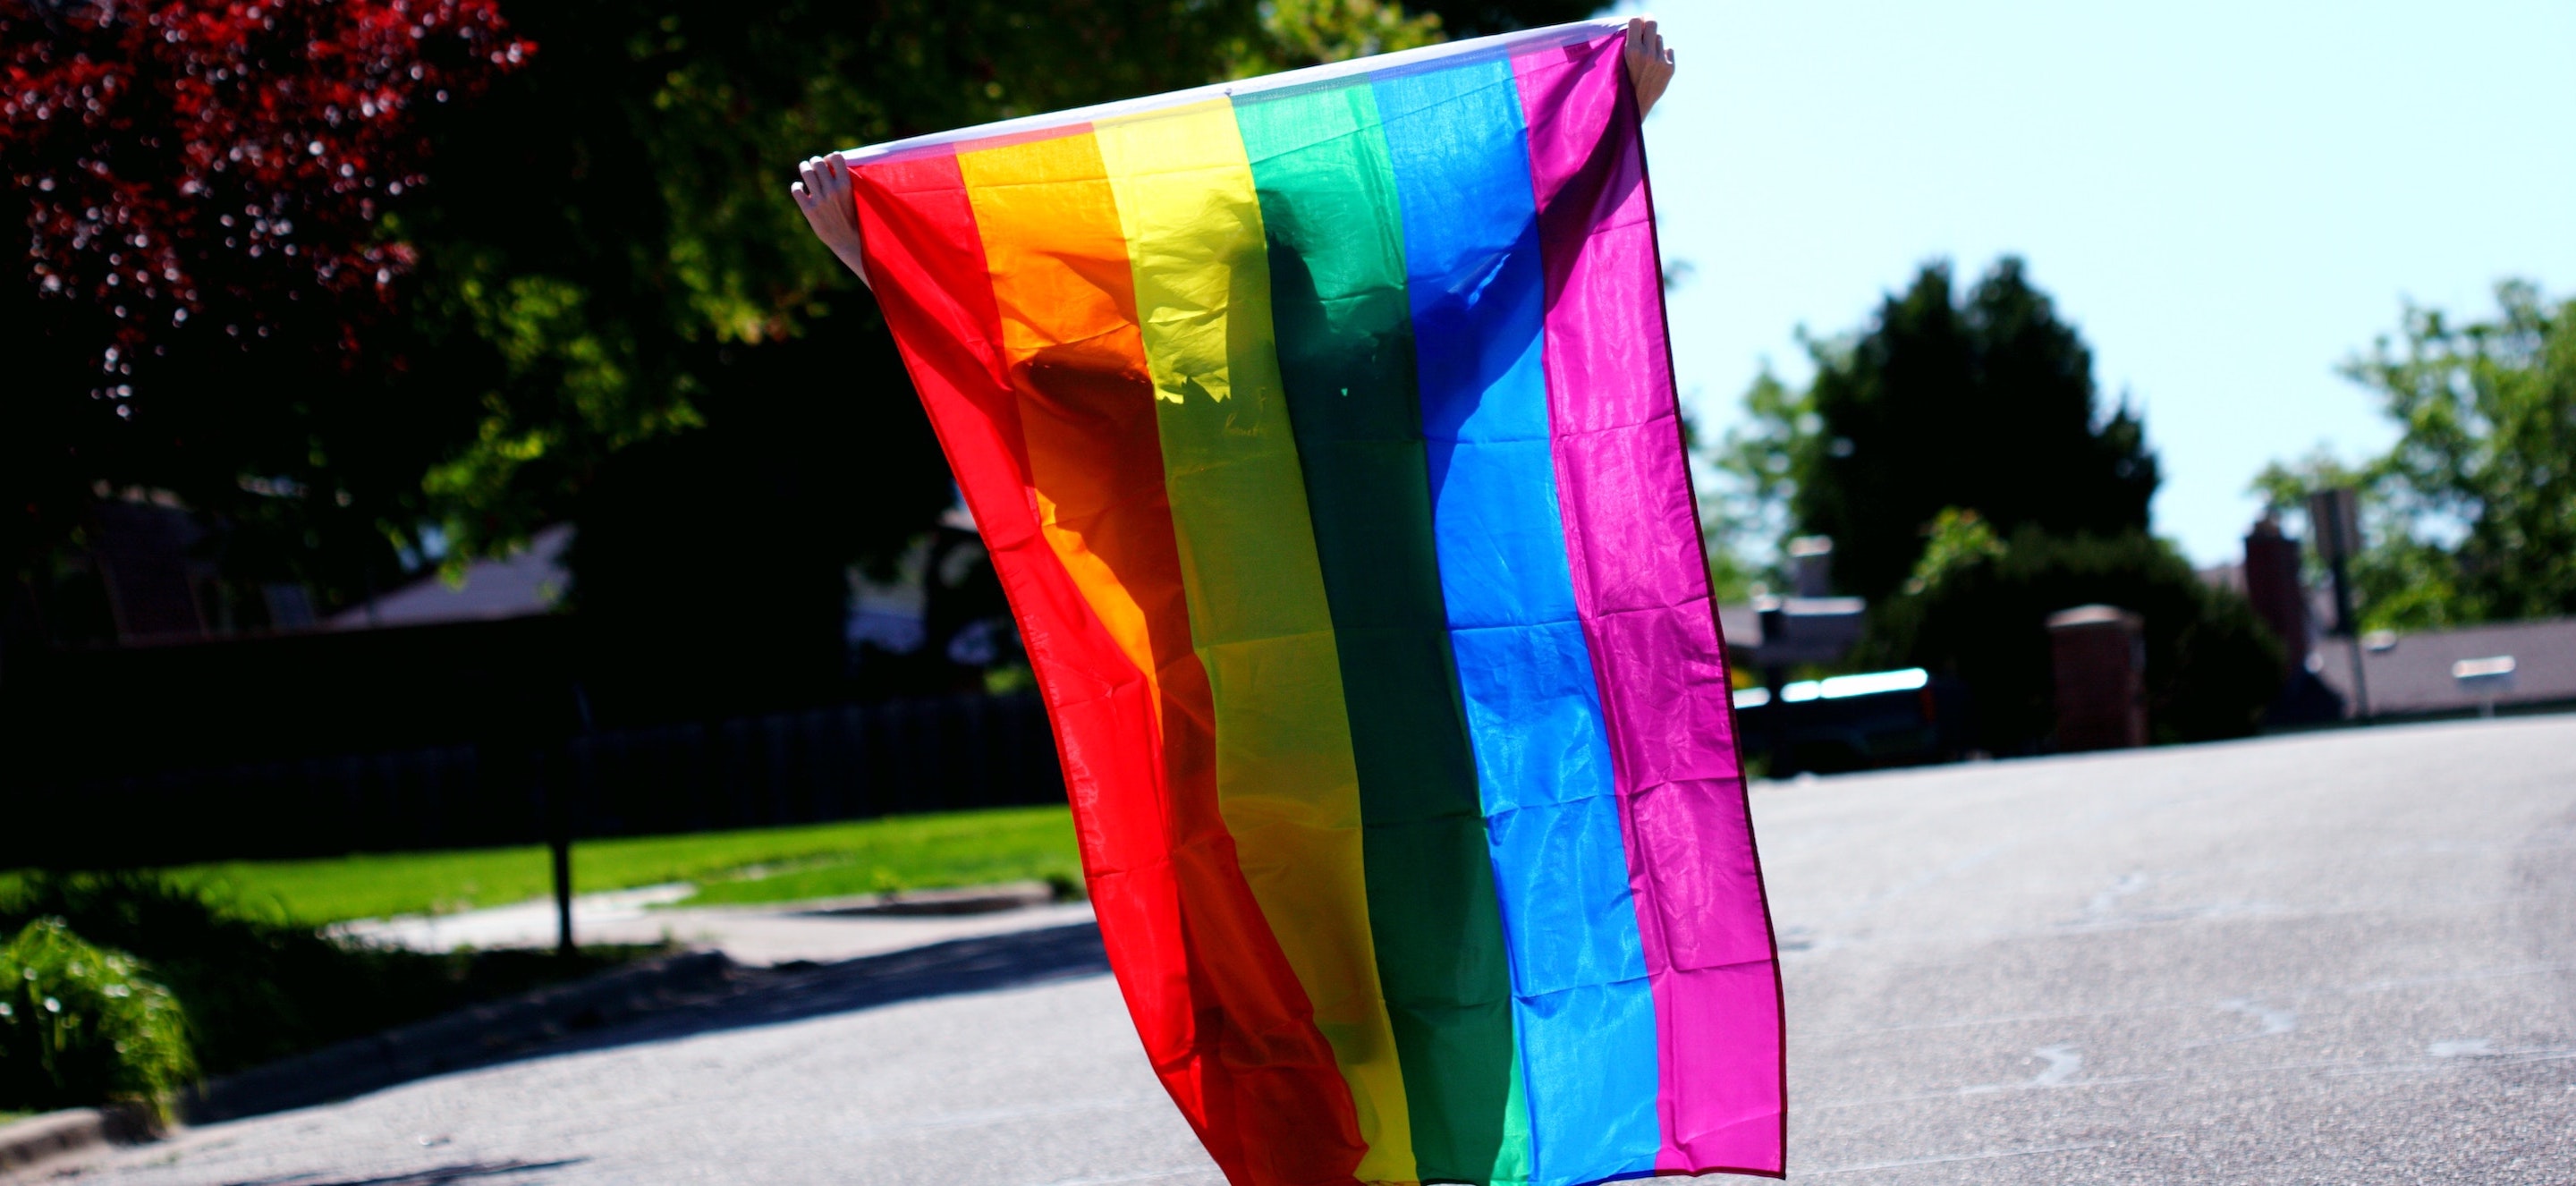 Lesbian Gay Bisexual Communities More At Risk For